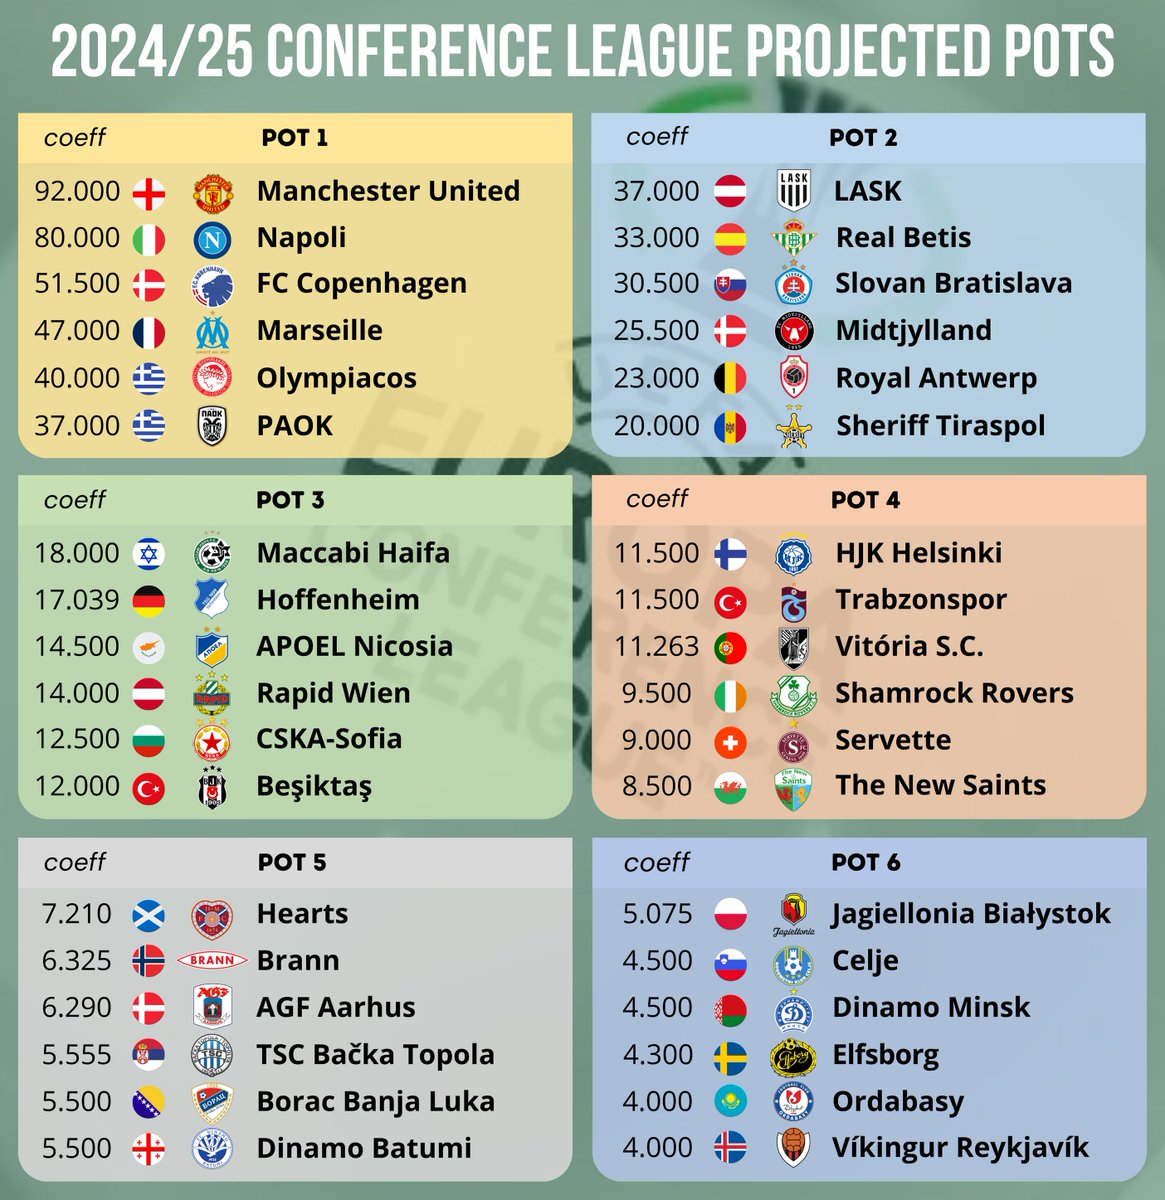 Conference League - Projected pots.

🇪🇸 OUT - Valencia
🇪🇸 IN - Real Betis

🏴󠁧󠁢󠁥󠁮󠁧󠁿 OUT - Newcastle United ⬆️
🏴󠁧󠁢󠁥󠁮󠁧󠁿 IN - Manchester United

🇩🇪 OUT - Augsburg
🇩🇪 IN - Hoffenheim

🇮🇹 OUT - Lazio ⬆️
🇮🇹 IN - Napoli

🇩🇰 OUT - Brøndby ⬆️
🇩🇰 IN - Midtjylland

🇬🇷 OUT - AEK Athens ⬆️
🇬🇷 IN - PAOK